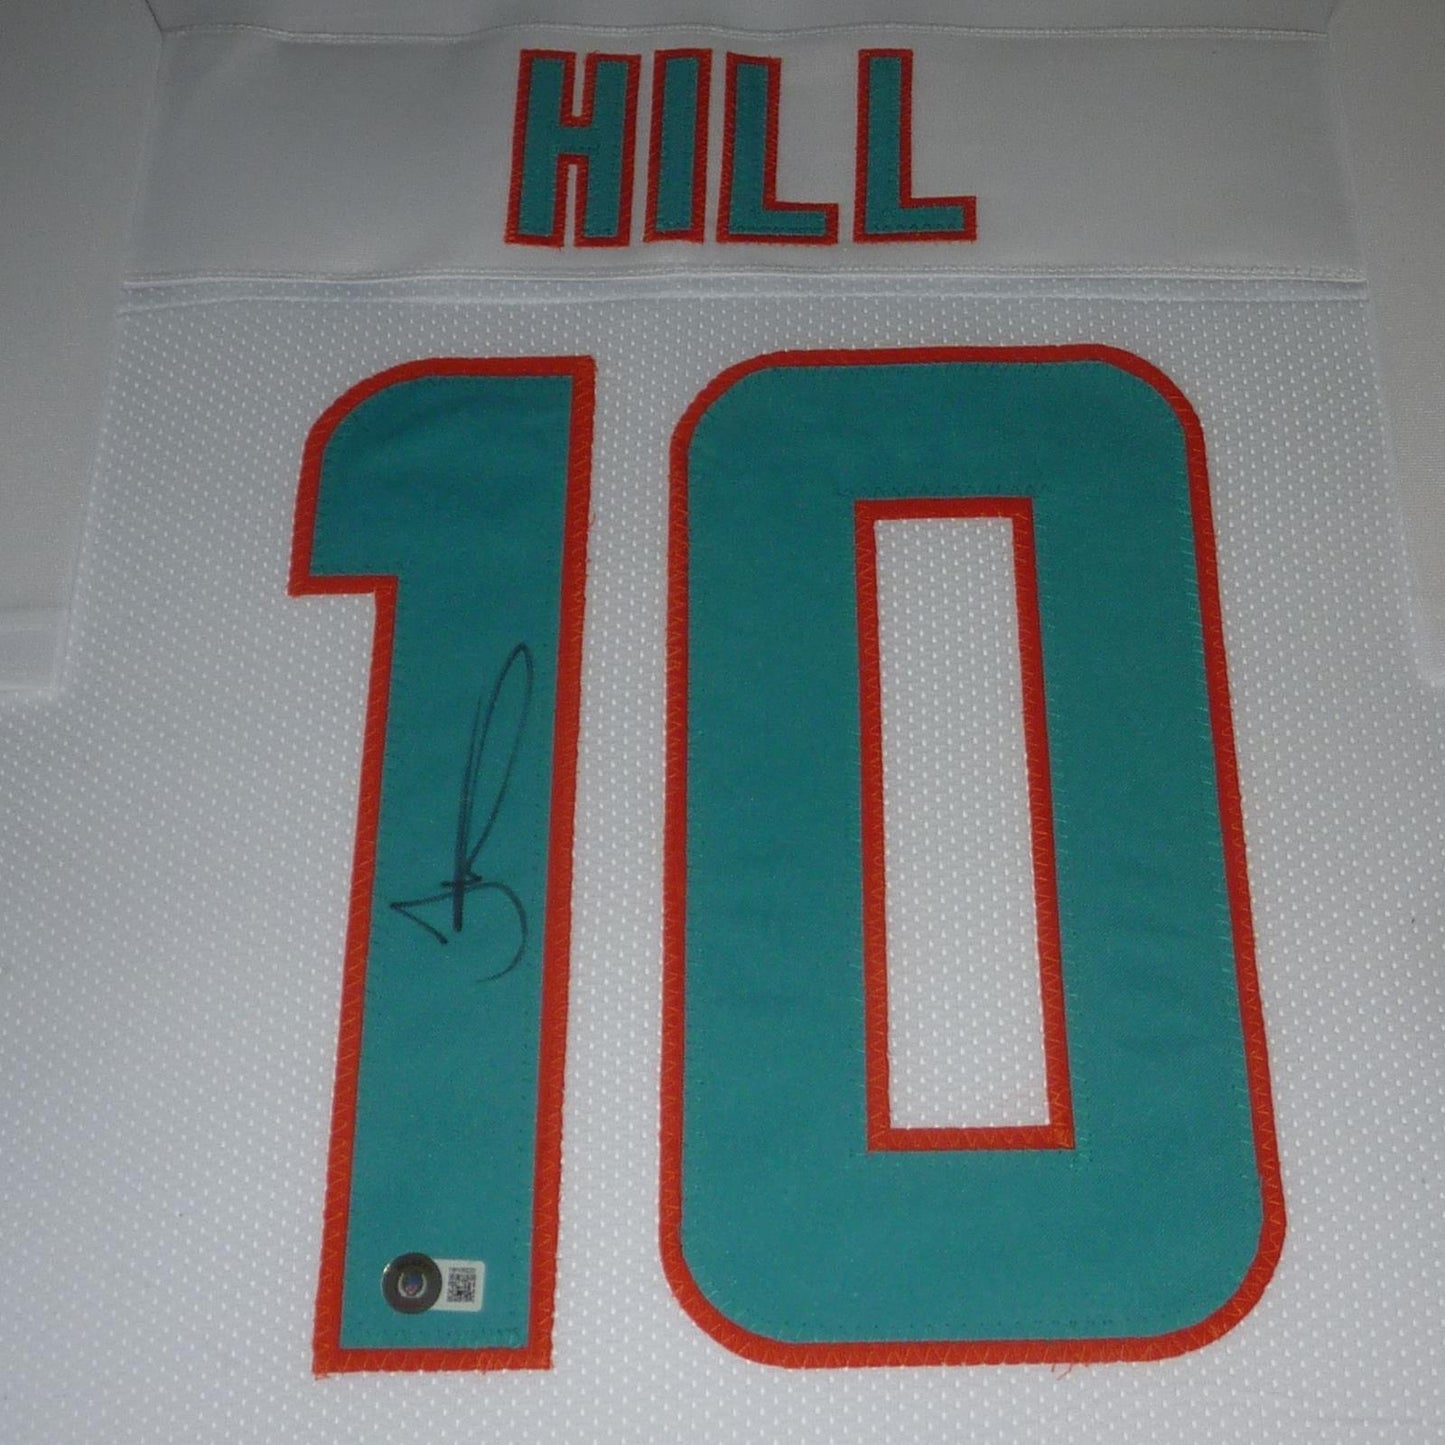 Tyreek Hill Autographed Miami Dolphins (White #10) Framed Jersey - Beckett